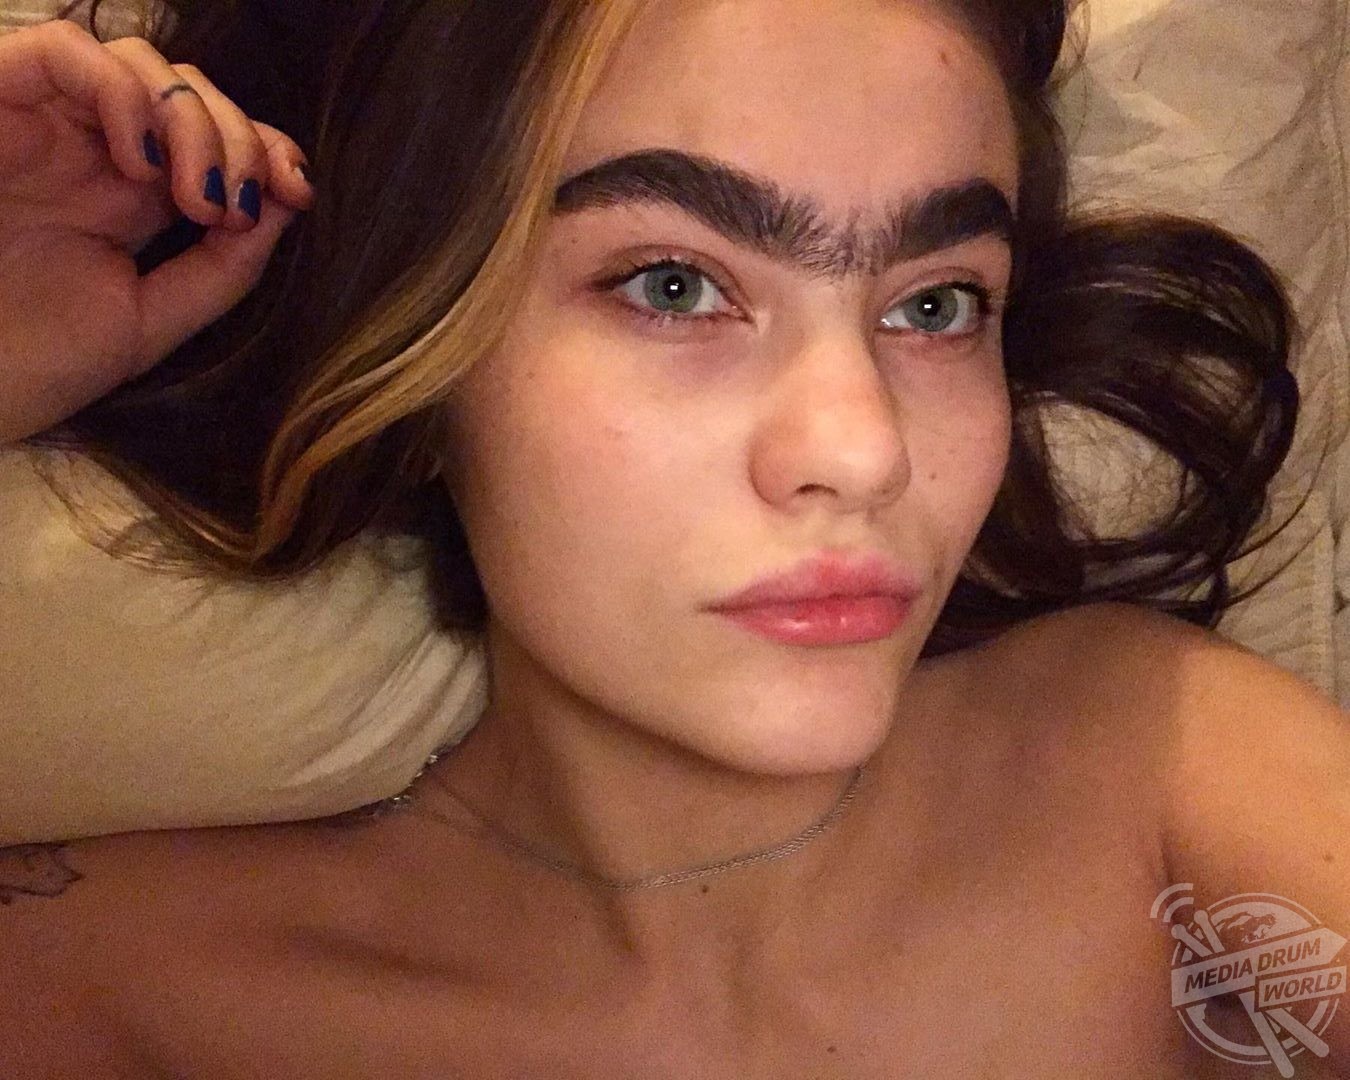 Sarah pictured lying down showing off her unibrow. 